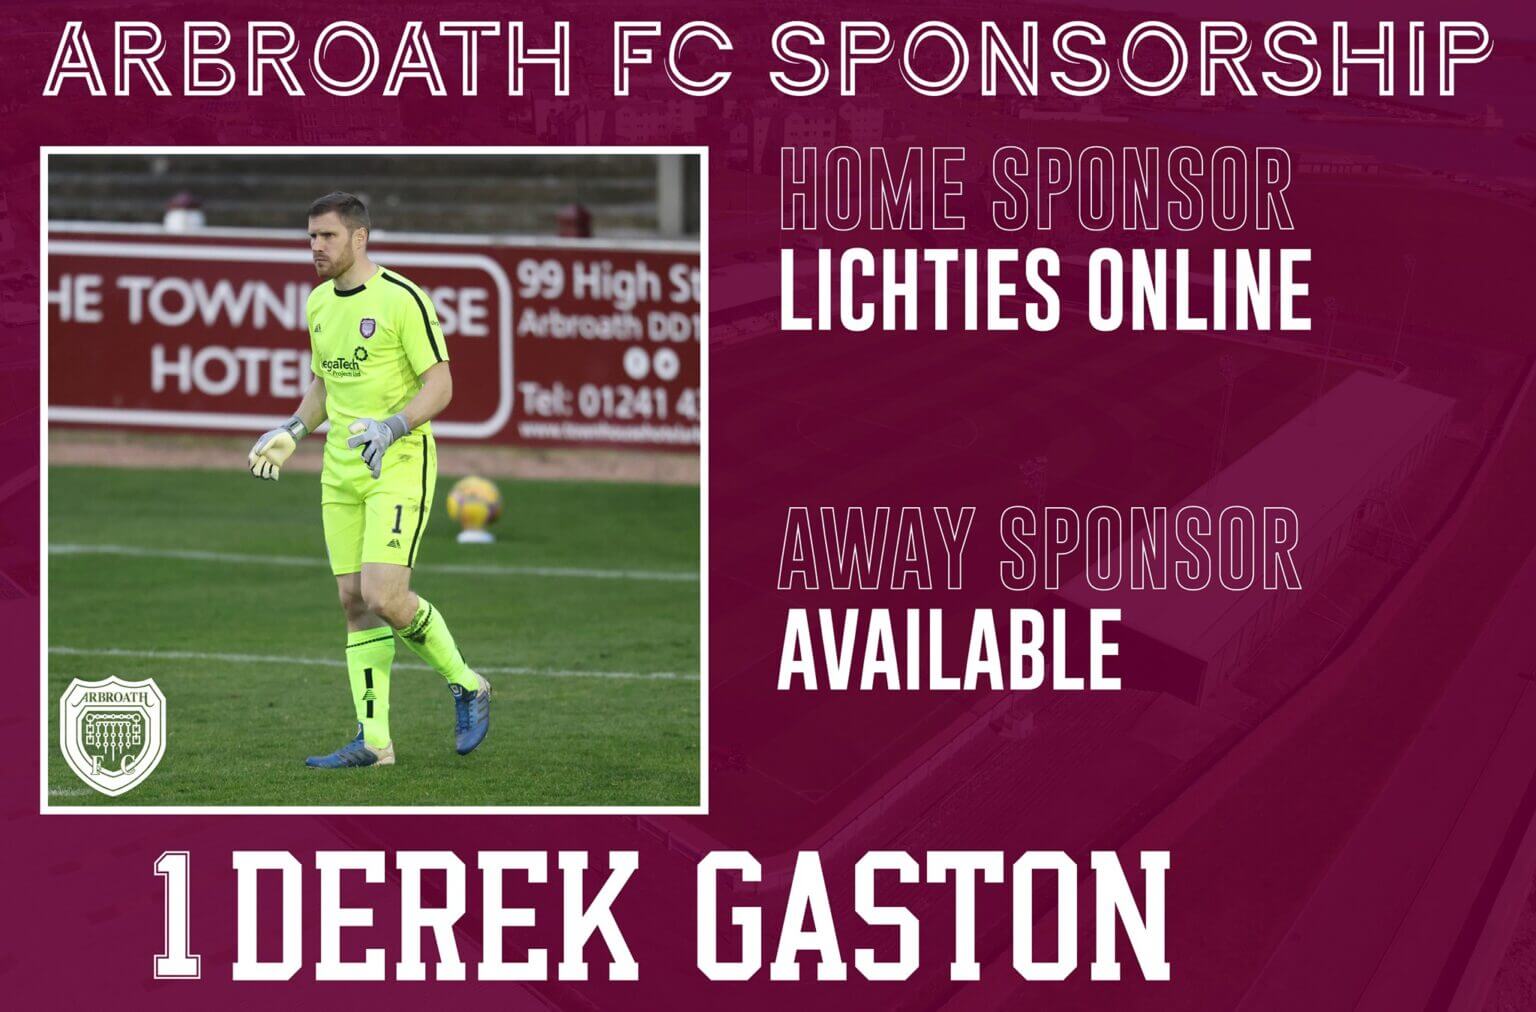 Player Sponsorship - Home and Away - Arbroath FC